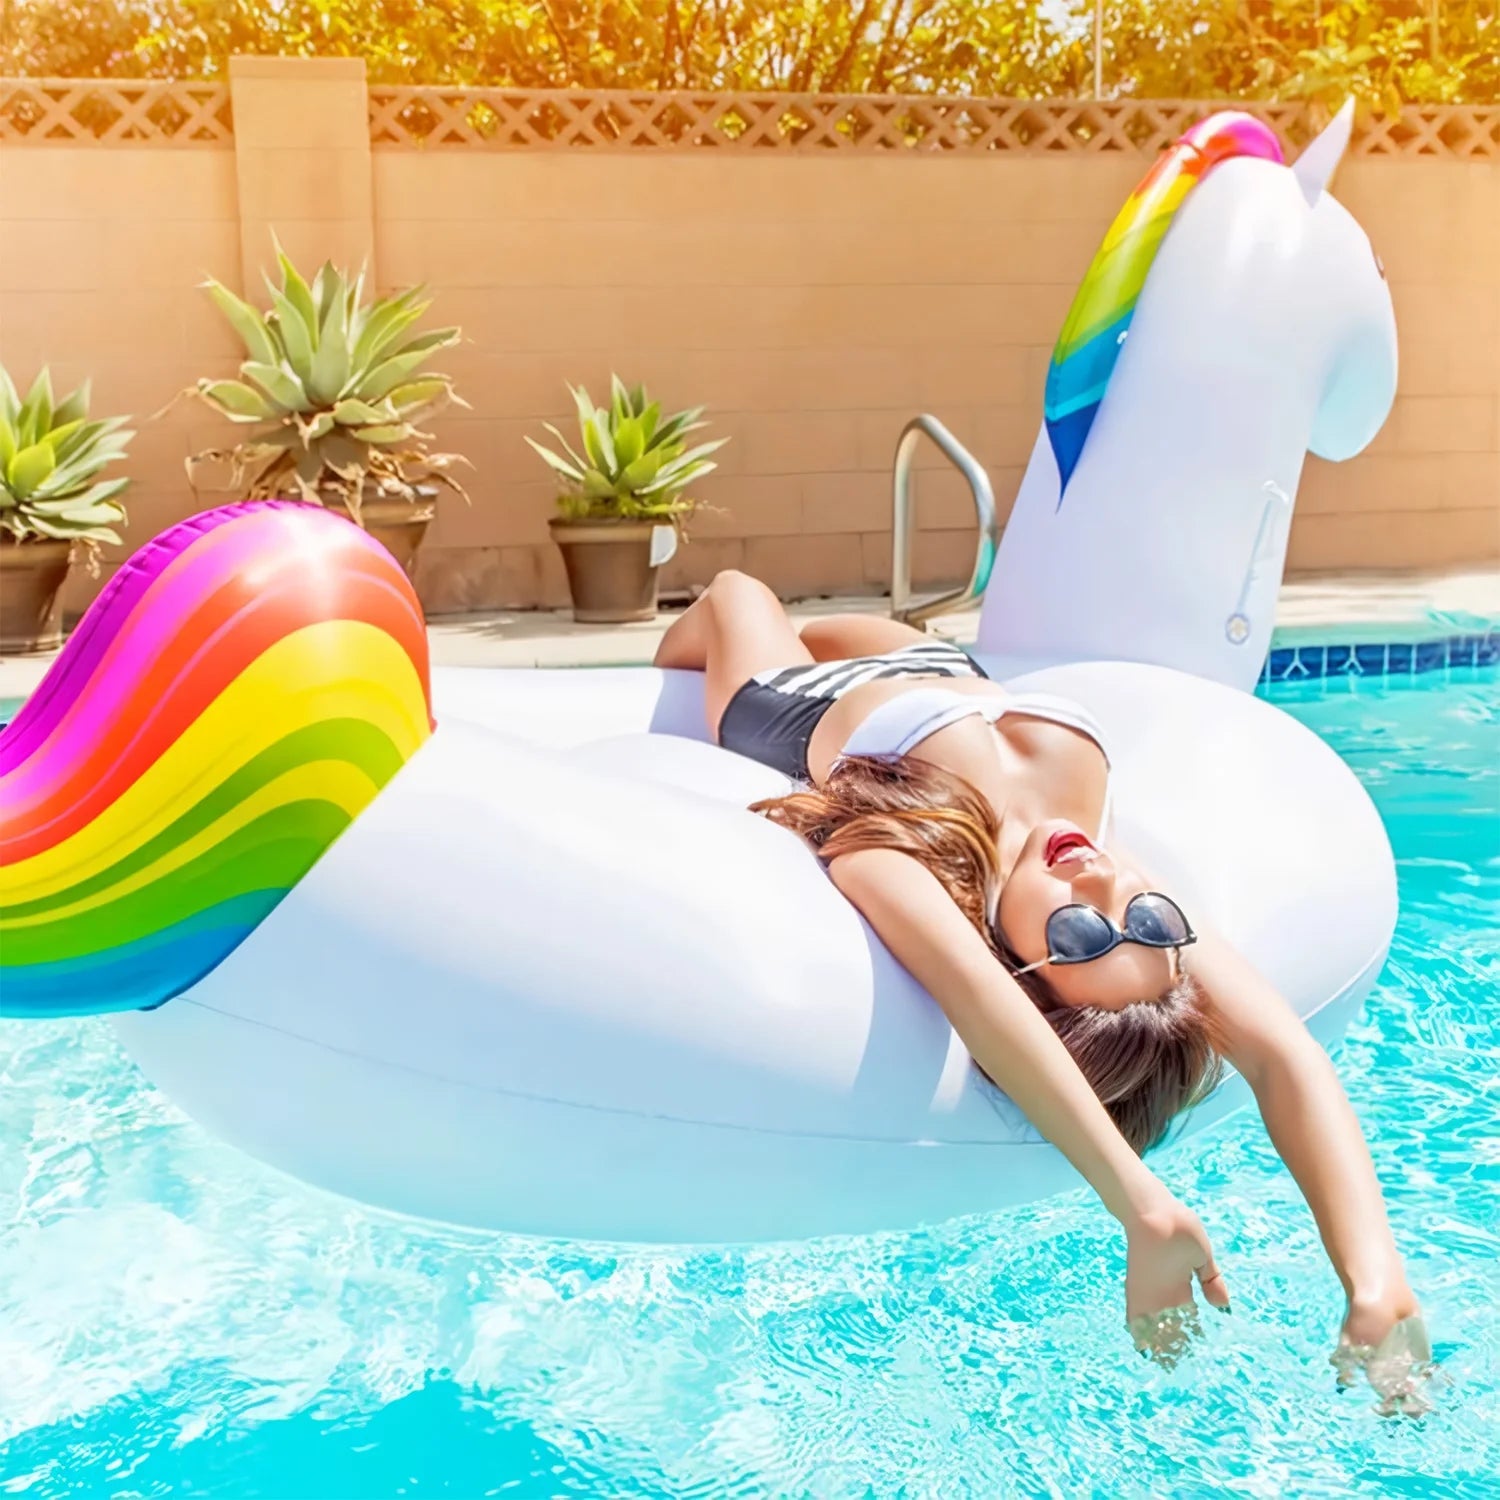 Large Unicorn Inflatable Pool Float for Kids, Giant Float for Pool, Swimming Pool Inflatables Ride-On Pool Toys